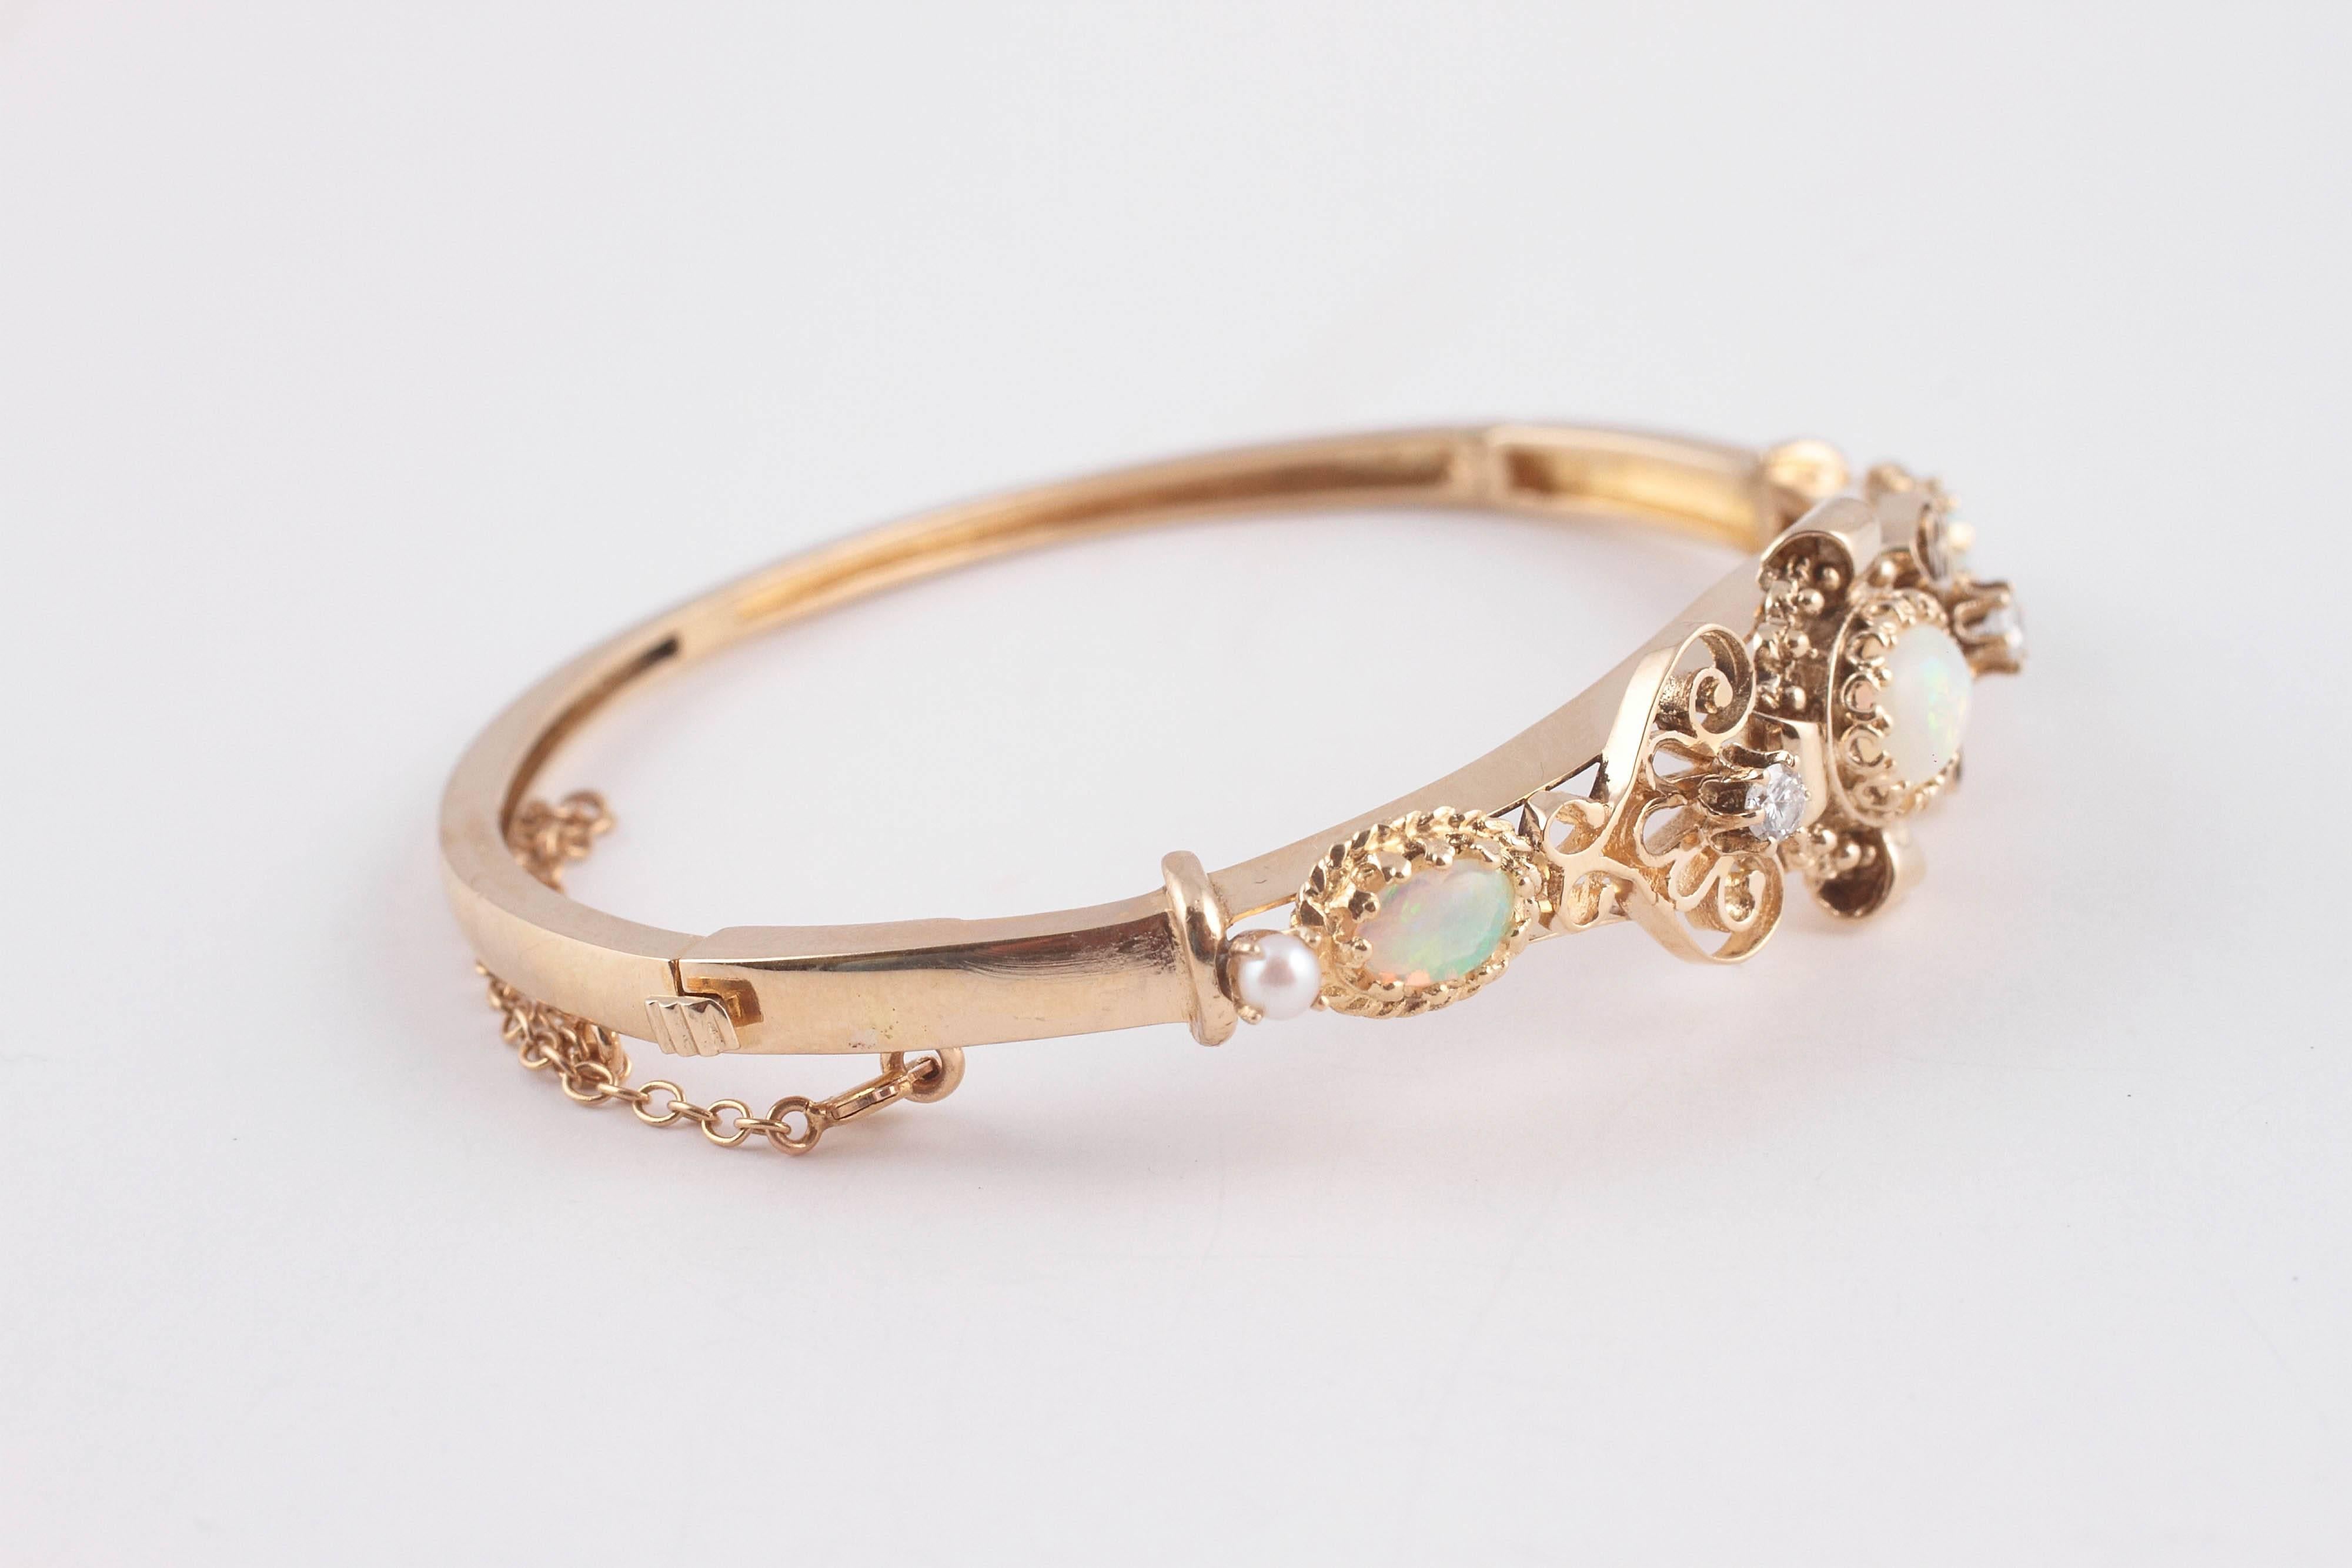 Bright and colorful opals inter spaced with diamonds and pearls in 14 karat yellow gold.  Knife-edge scrolls and broad curls further decorate the bangle with a safety chain to secure the deal.  